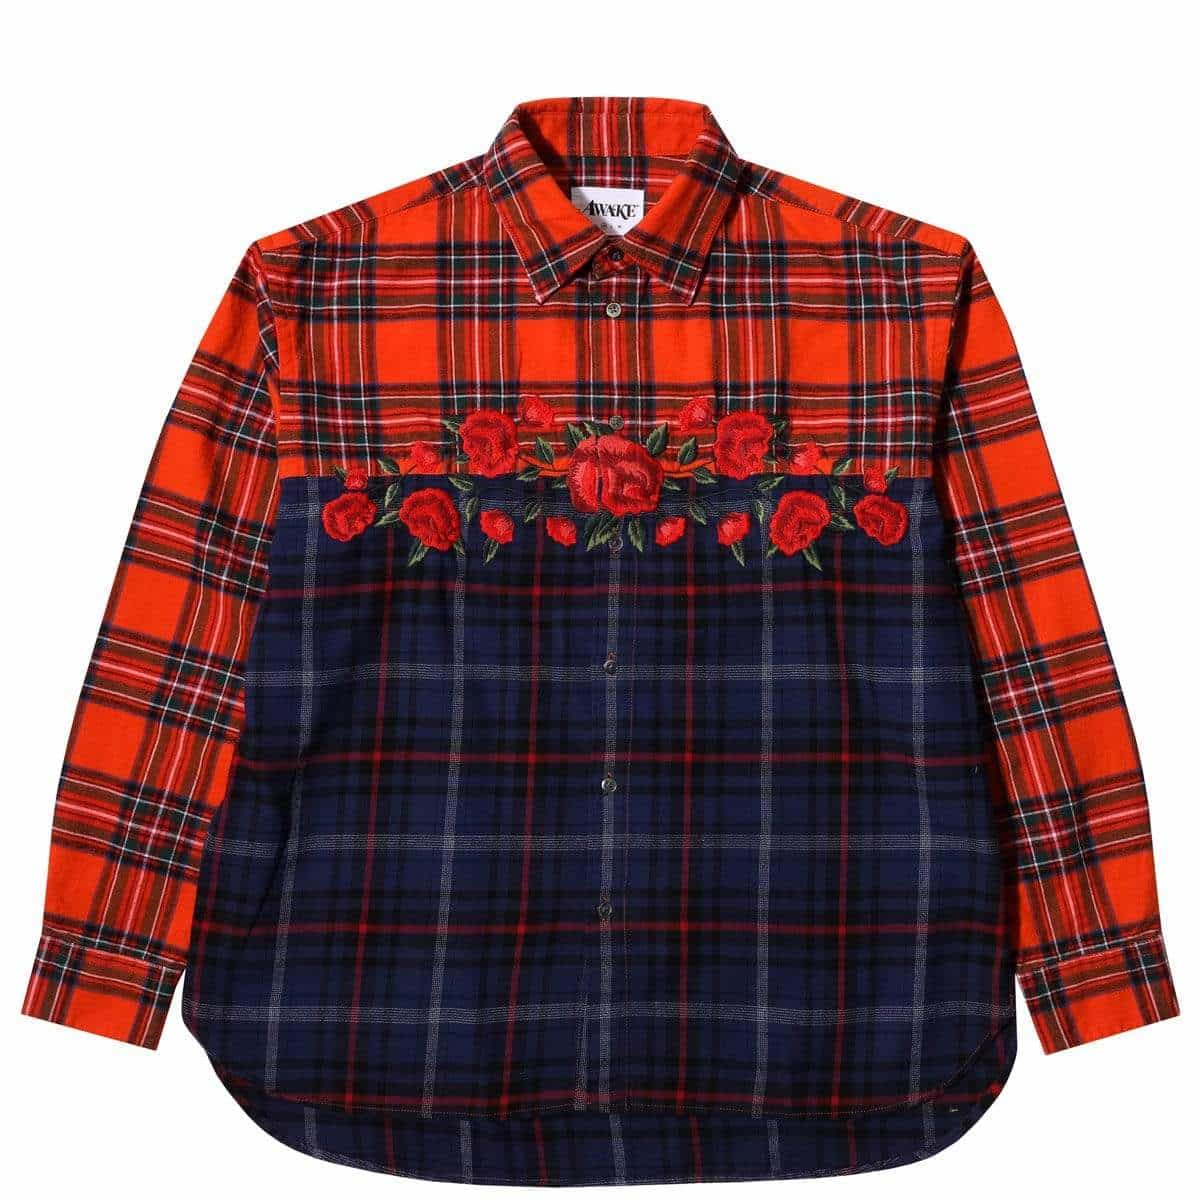 Awake Embroidered Rose Flannel Shirt Red